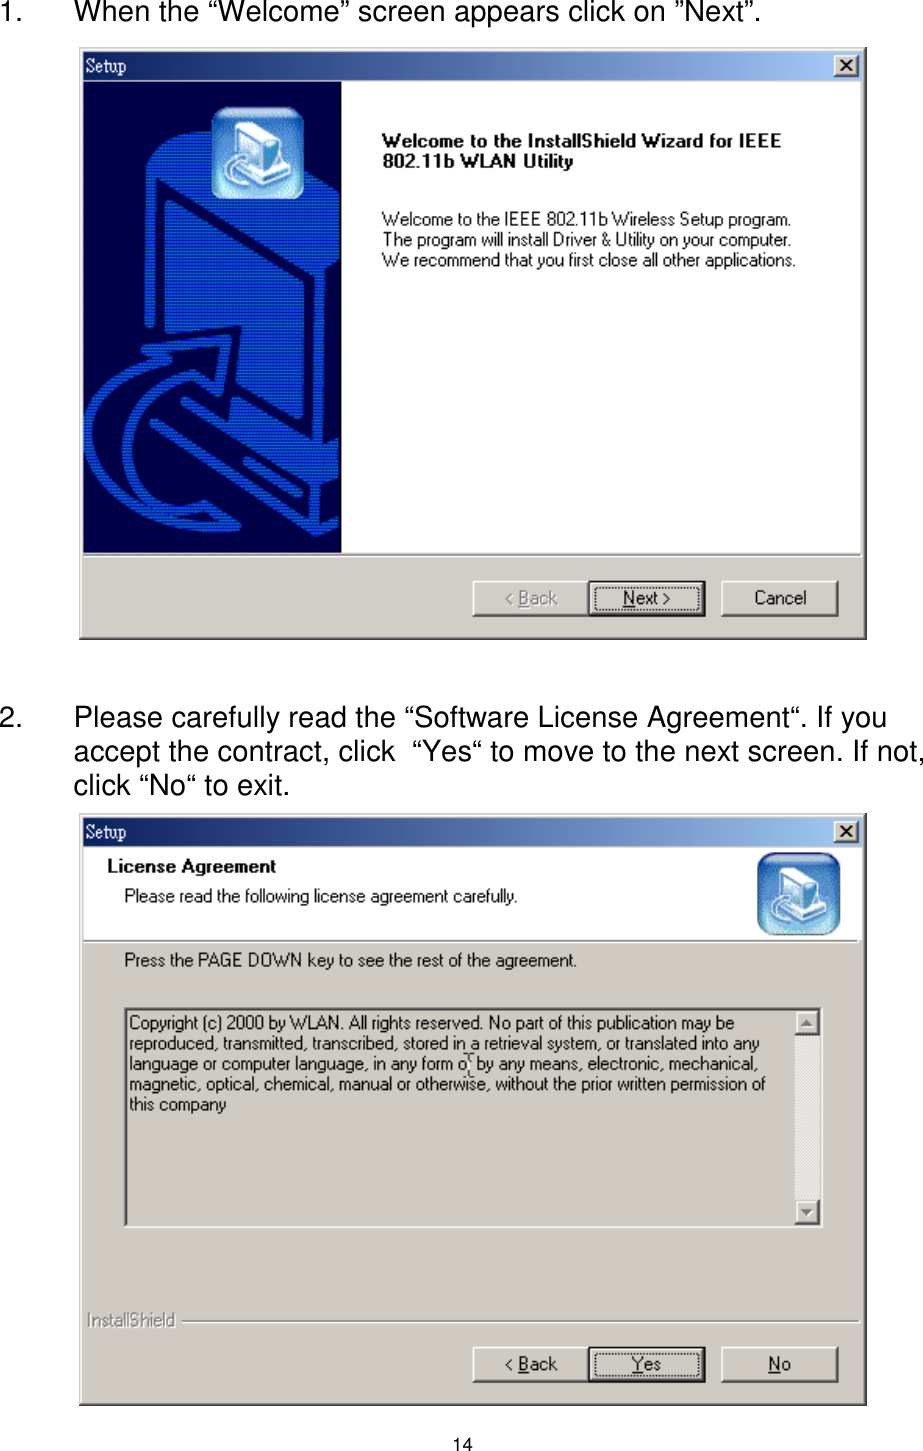  14 1.  When the “Welcome” screen appears click on ”Next”.               2.  Please carefully read the “Software License Agreement“. If you accept the contract, click  “Yes“ to move to the next screen. If not, click “No“ to exit.            